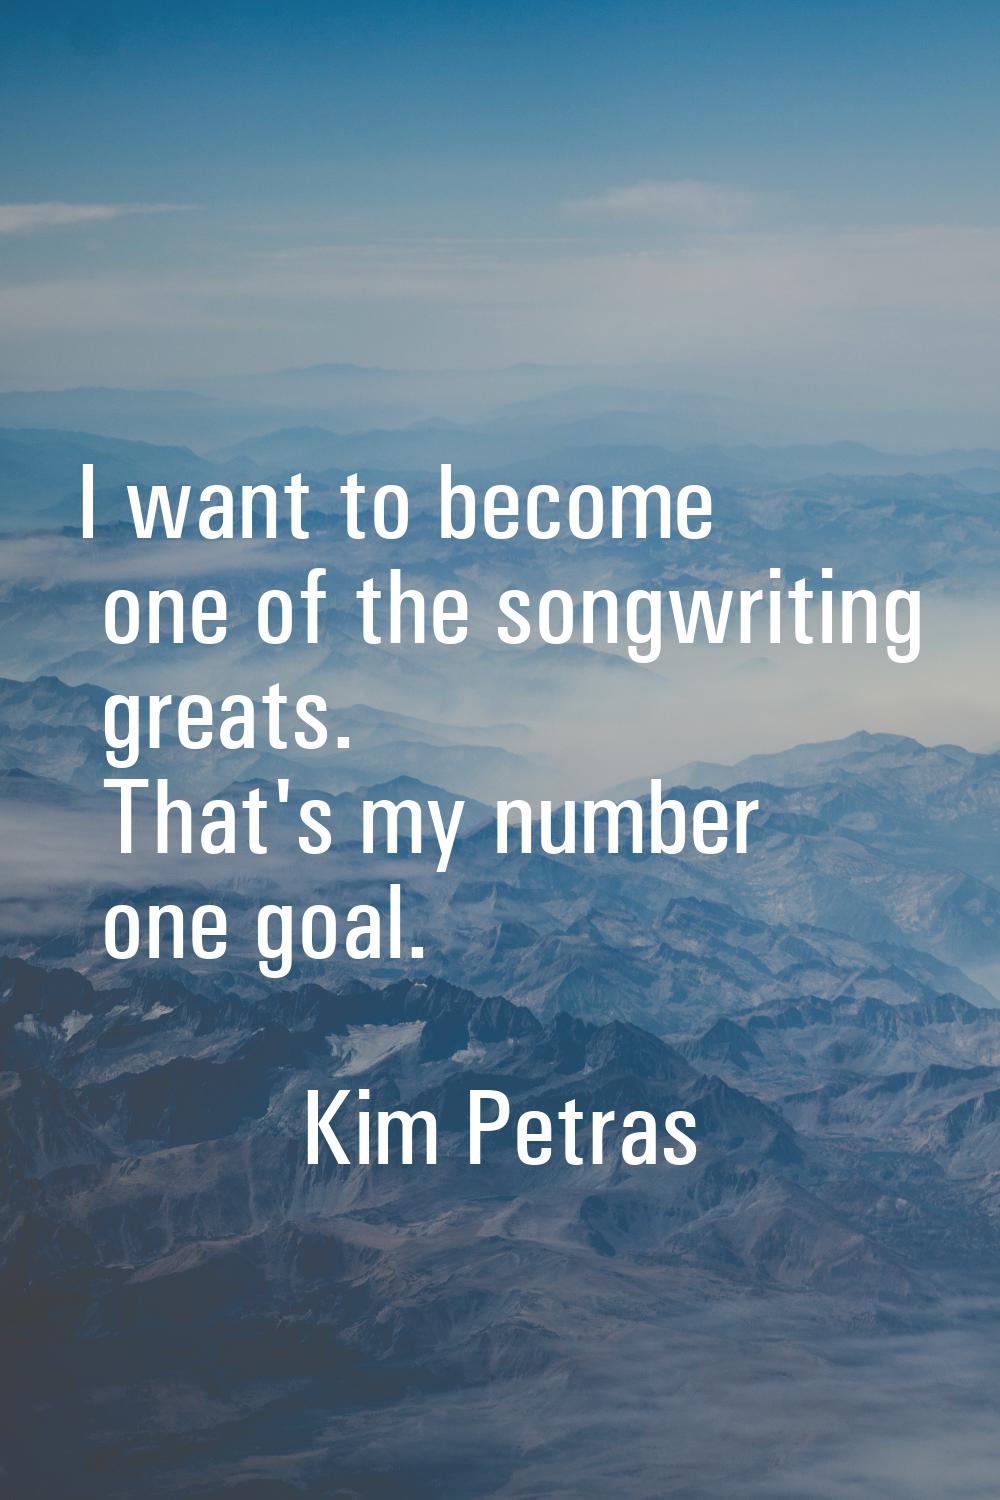 I want to become one of the songwriting greats. That's my number one goal.